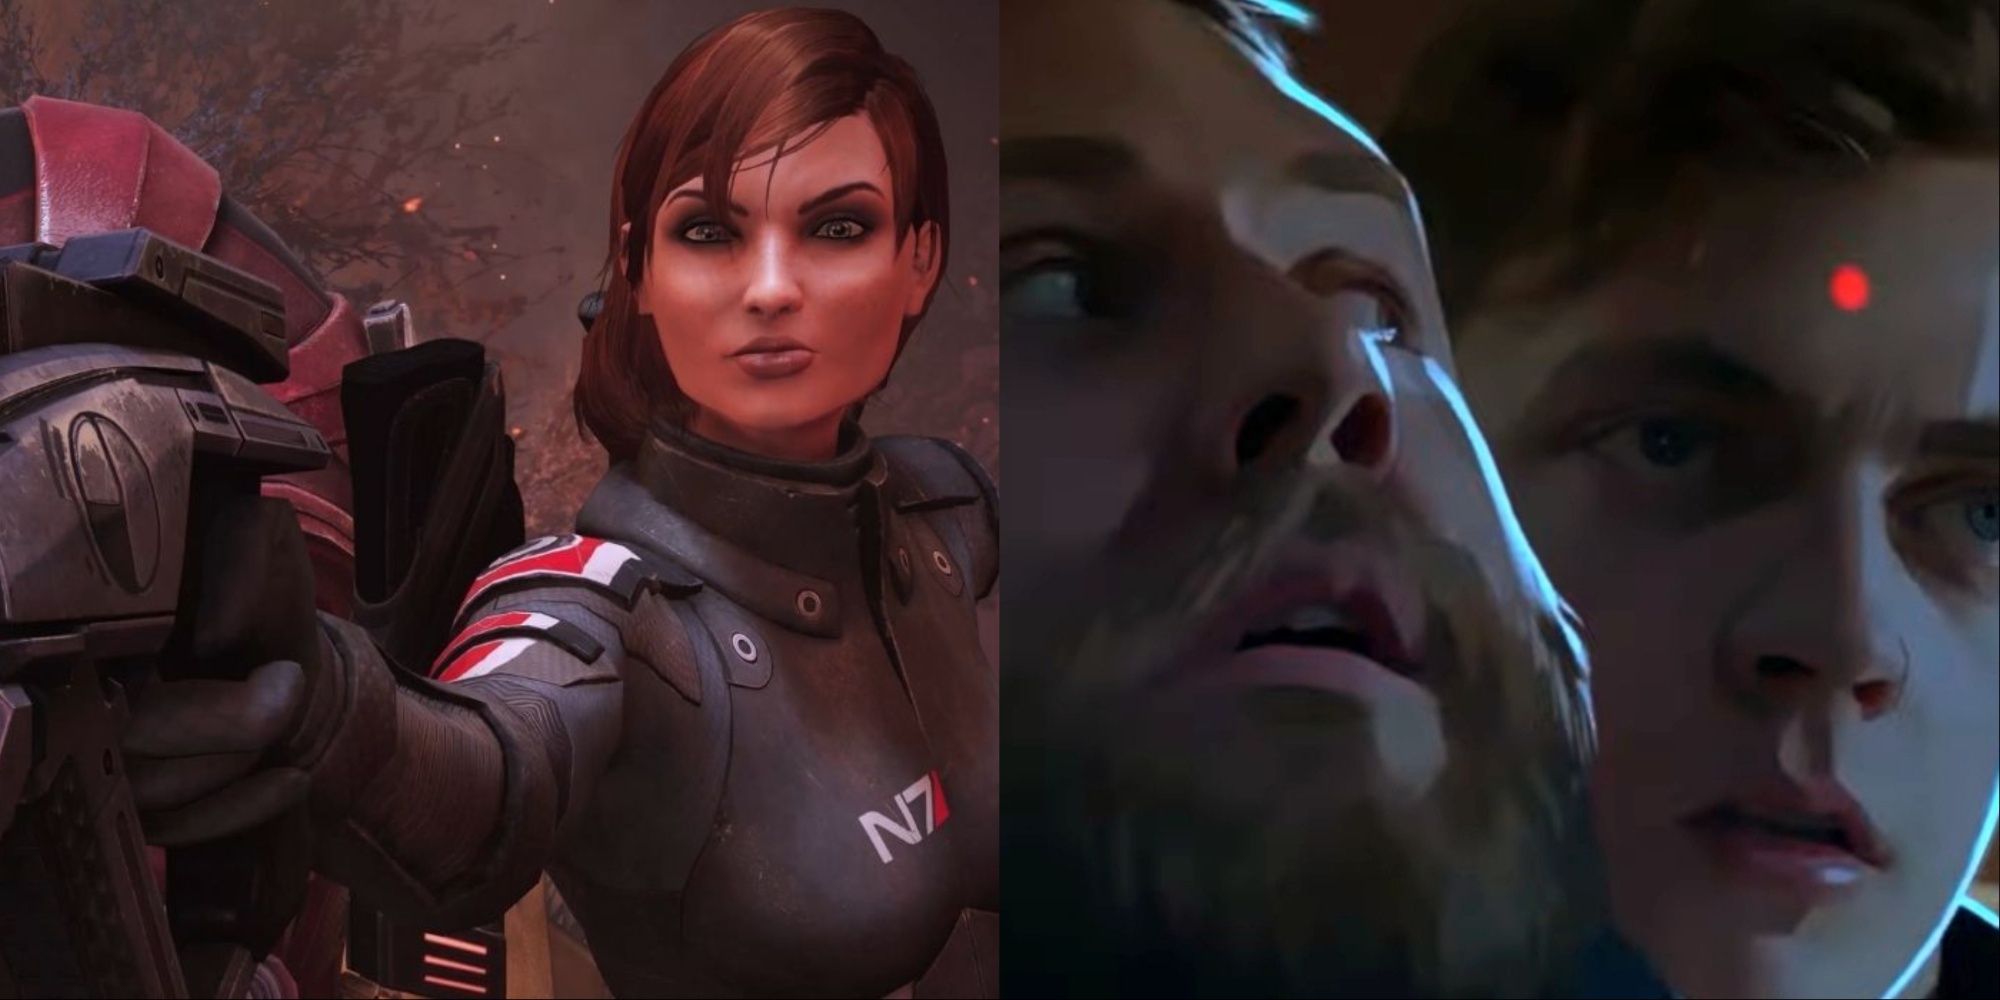 Choice And Consequences Games On Game Pass Featured Split Image Mass Effect and As Dusk Falls